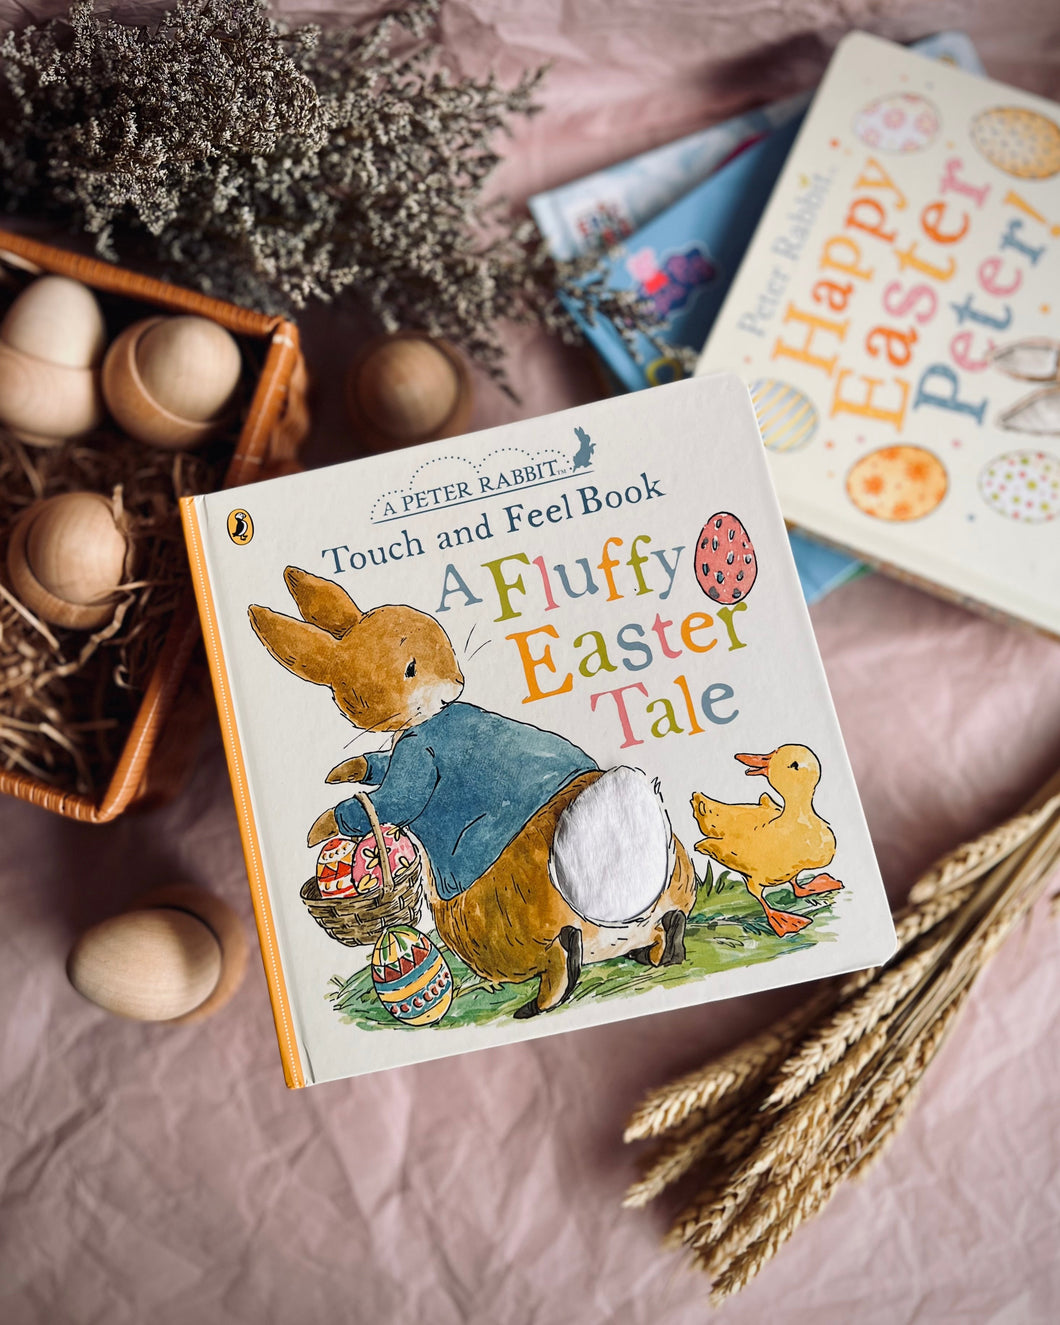 Peter Rabbit - A Fluffy Easter Tale